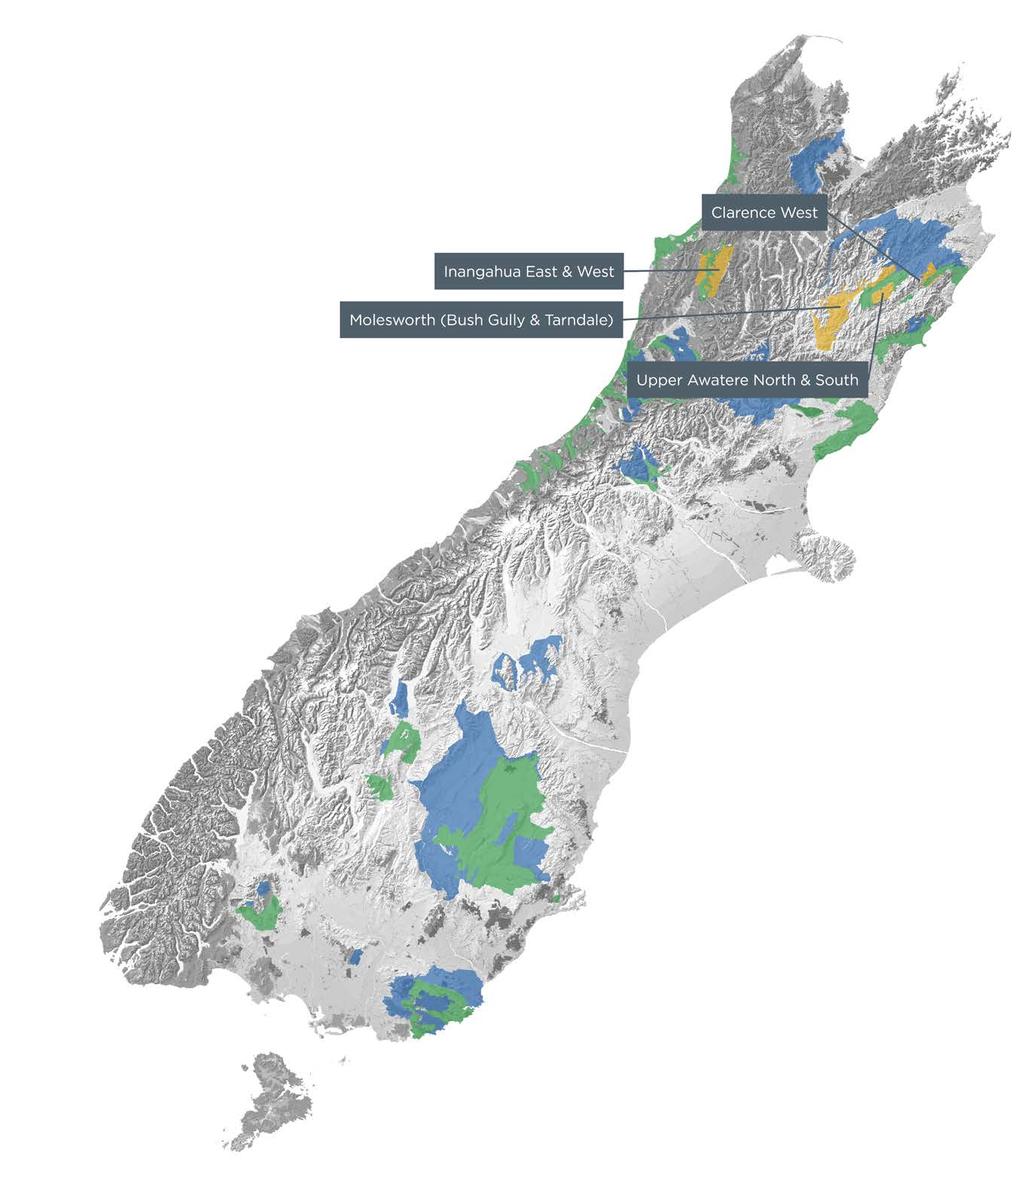 2019 TBFREE PEST CONTROL OPERATIONS CONSULTATION 7 PROPOSED OPERATIONS AREA COVERAGE PROPOSED ACTIVITY NORTH ISLAND NORTHERN SOUTH ISLAND SOUTHERN SOUTH ISLAND Aerial operations 68,073 ha 118,675 ha